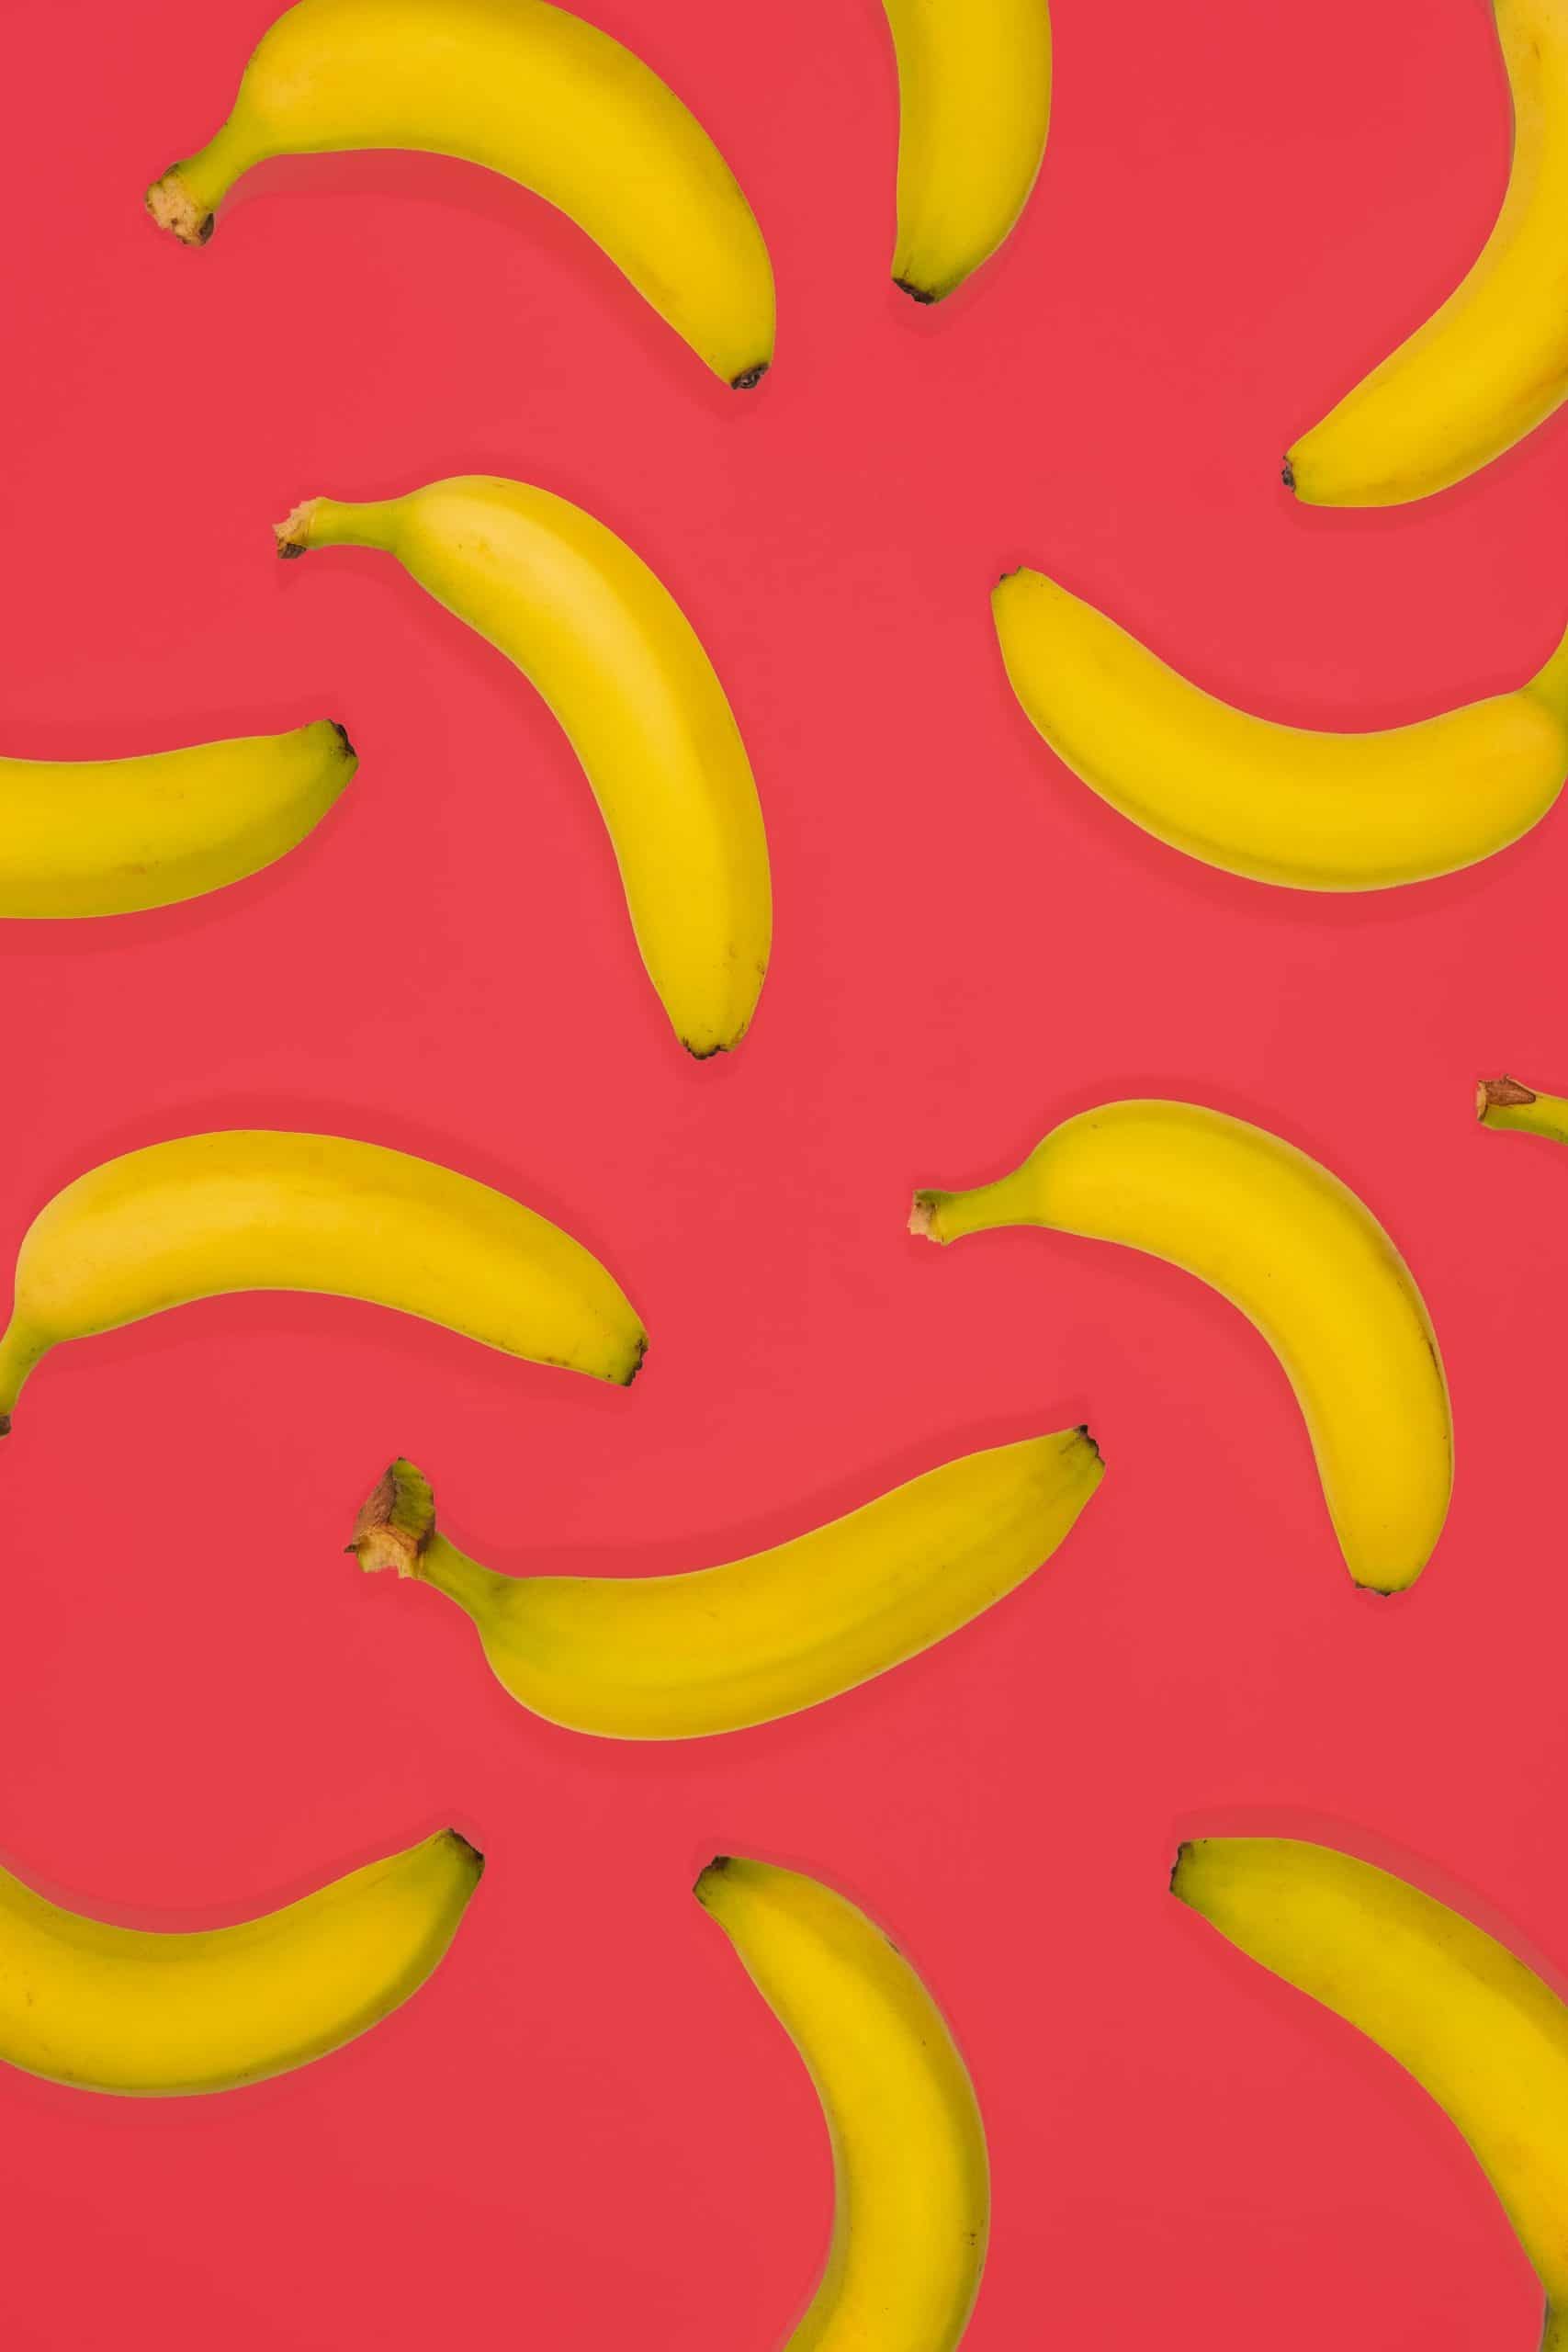 bananas on a pink background